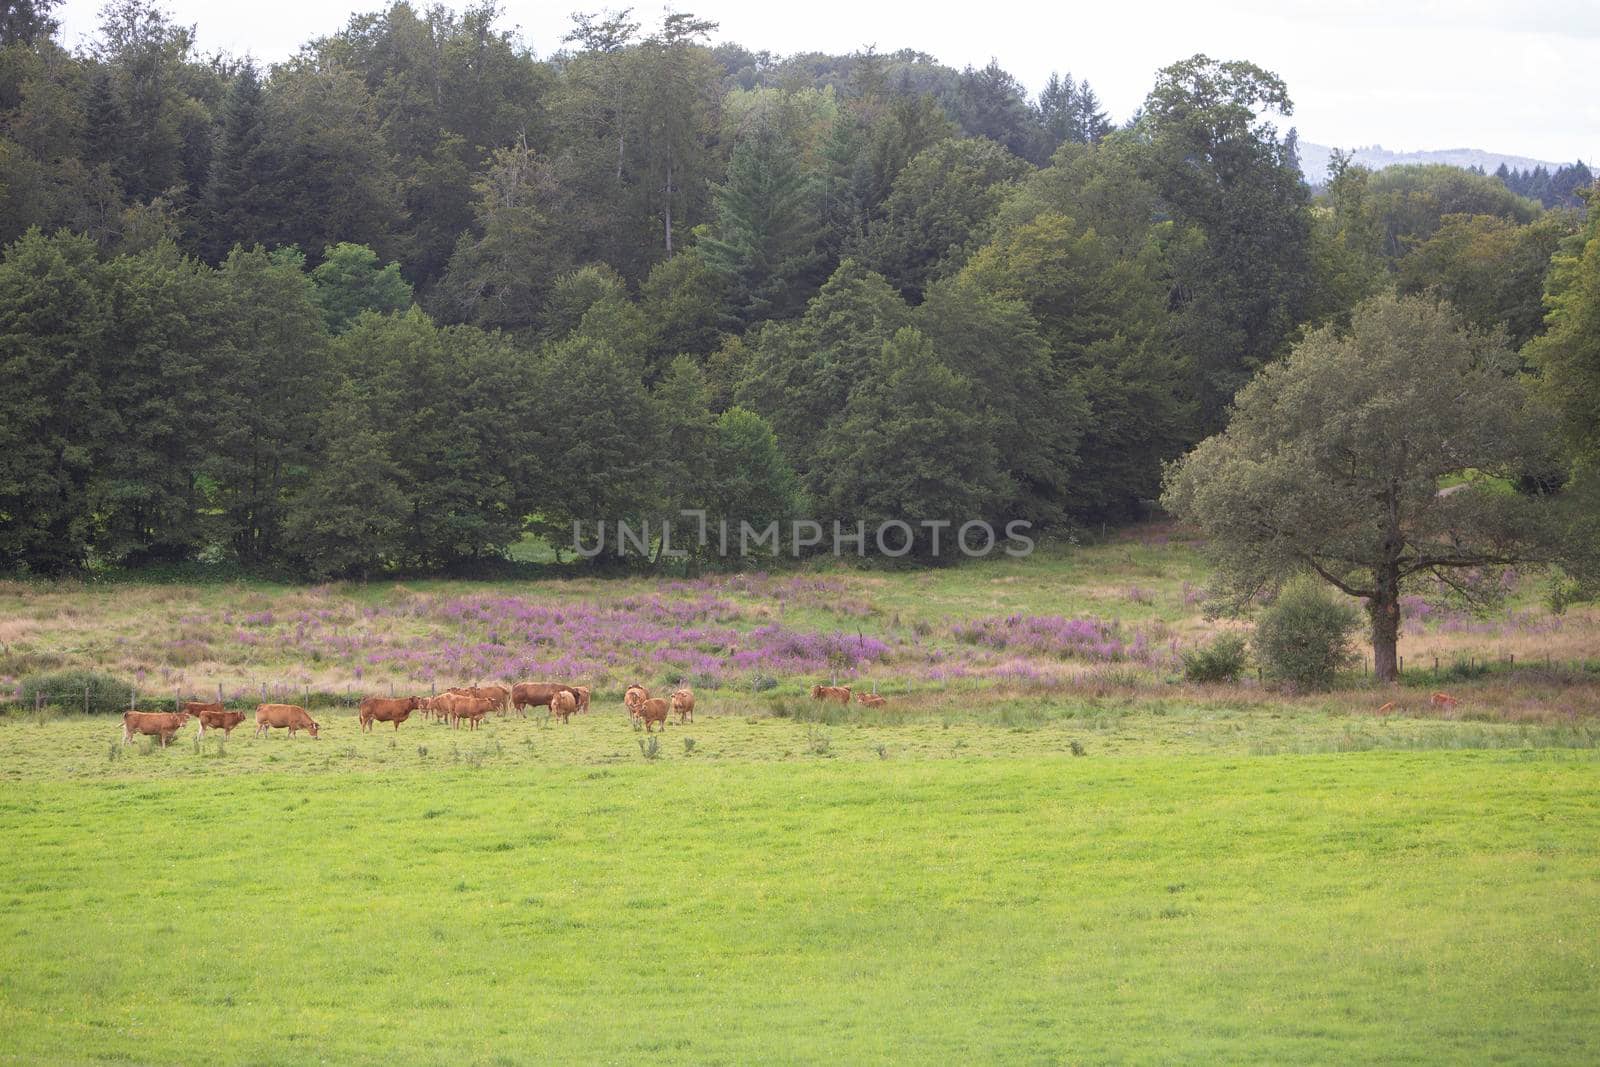 group of limousin cows in france near heather and forest by ahavelaar